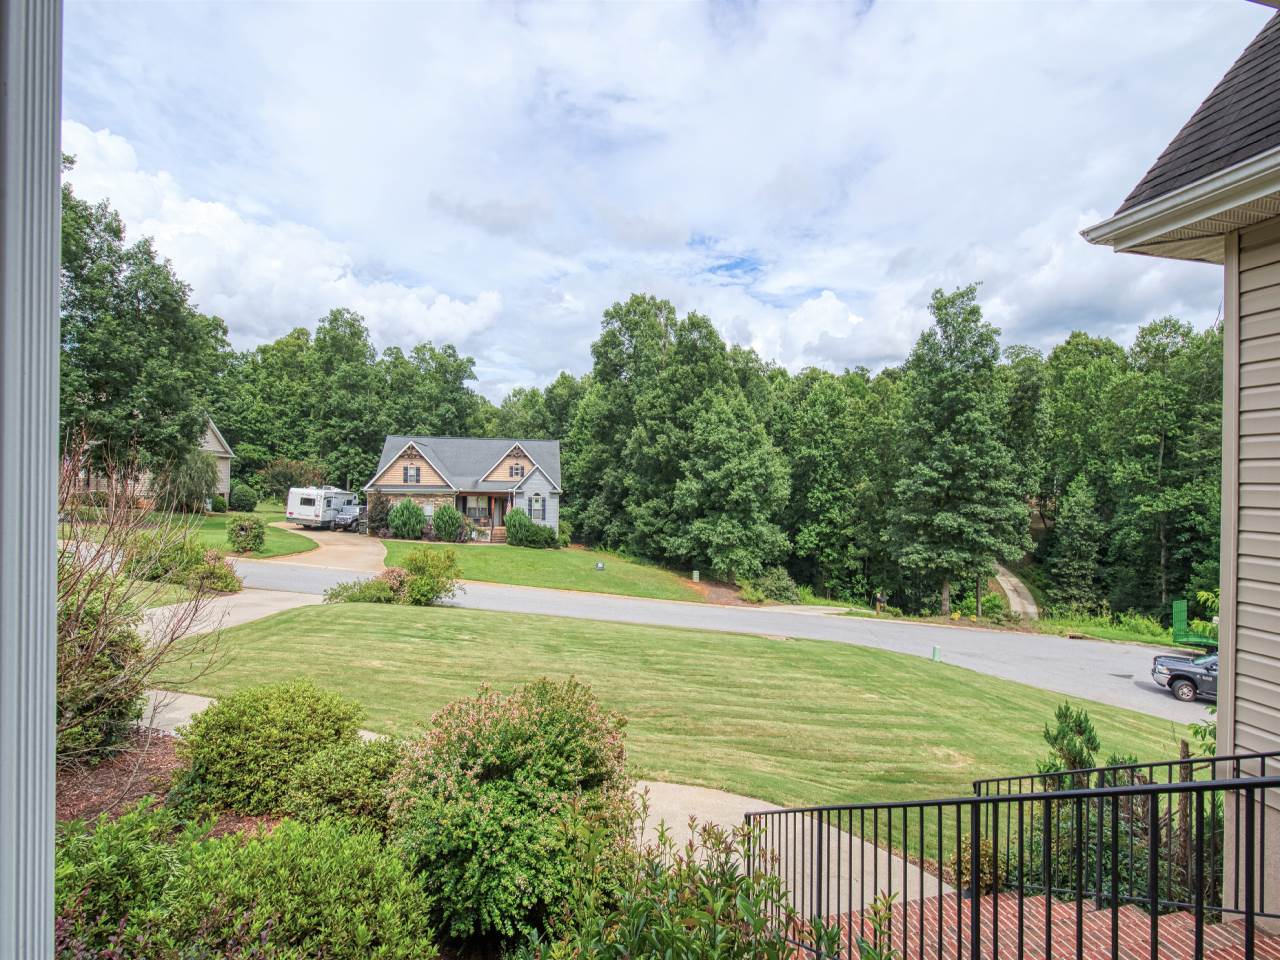 110 Grand Hollow Rd., Easley, SC 29642